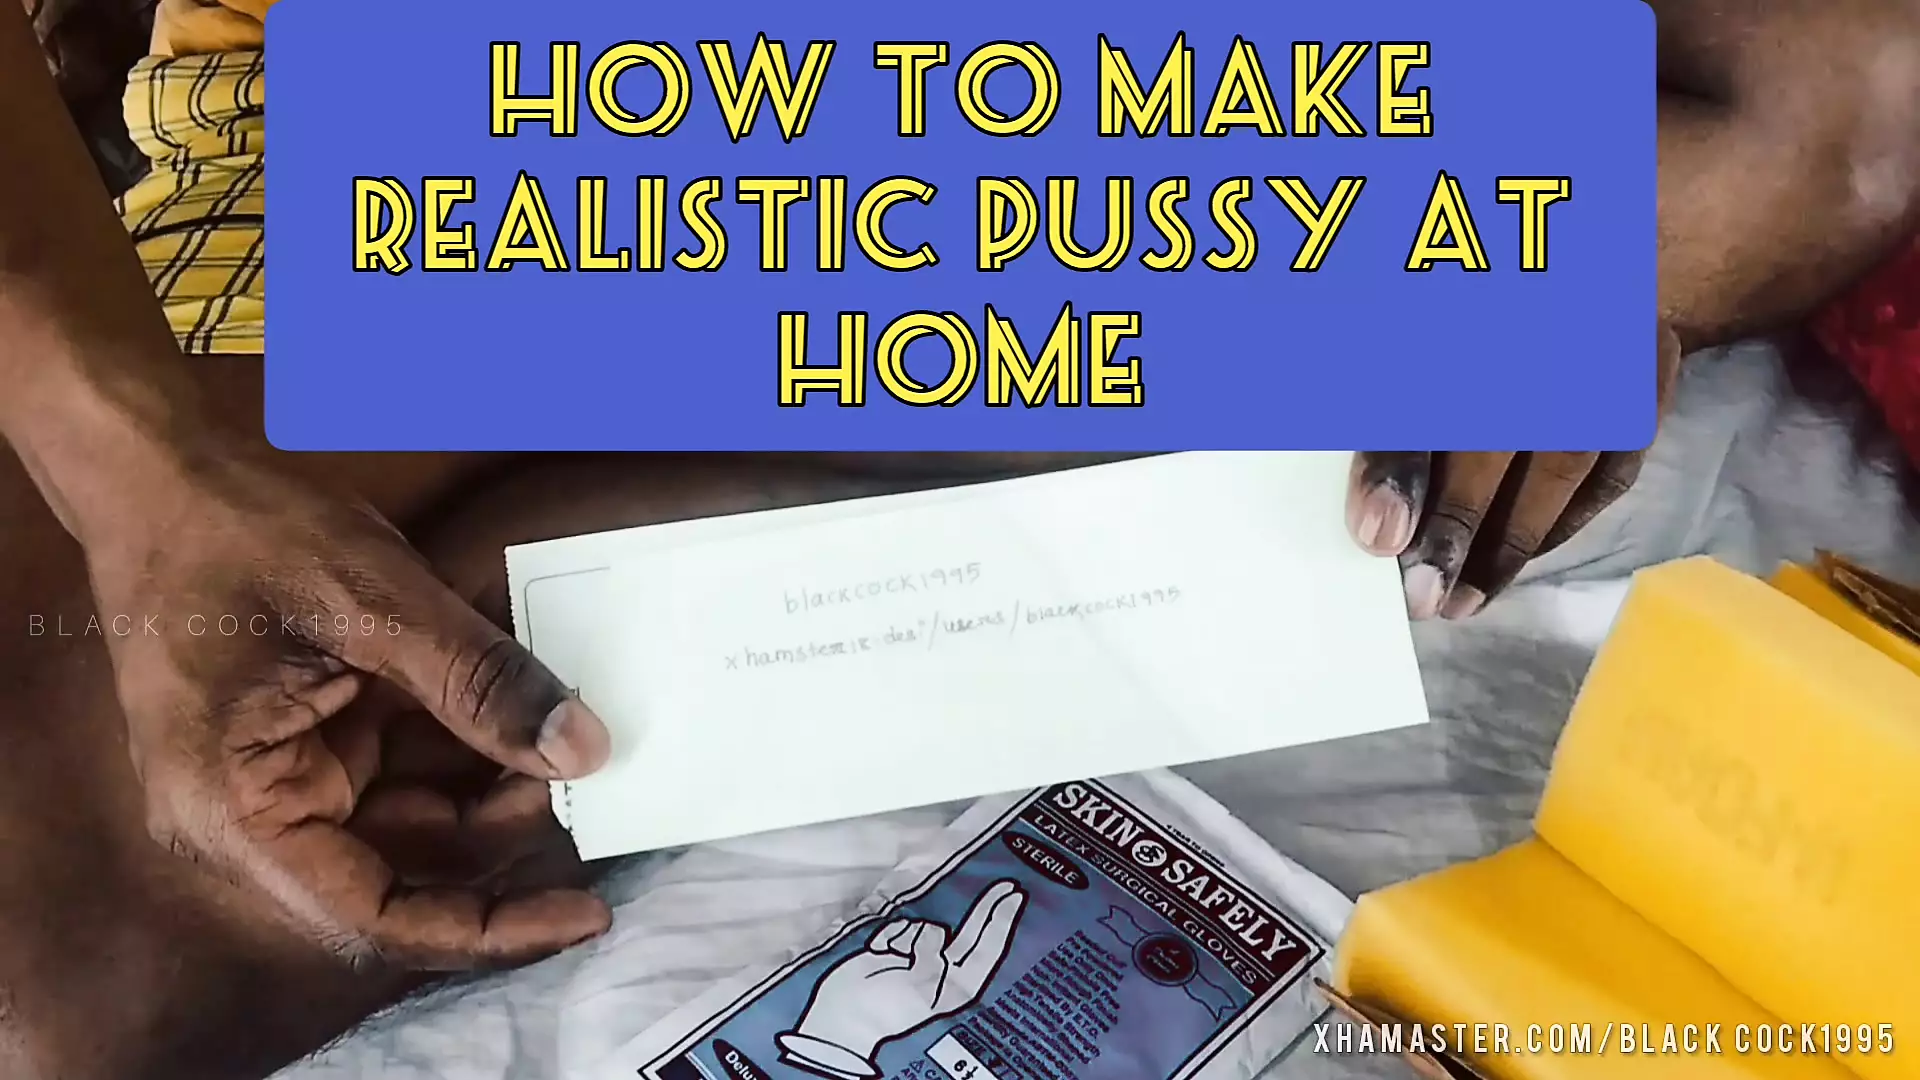 How To Make A Toy Vagina Or Anus At Home And How To Make A Sex Toy At Home By Blackcock1995